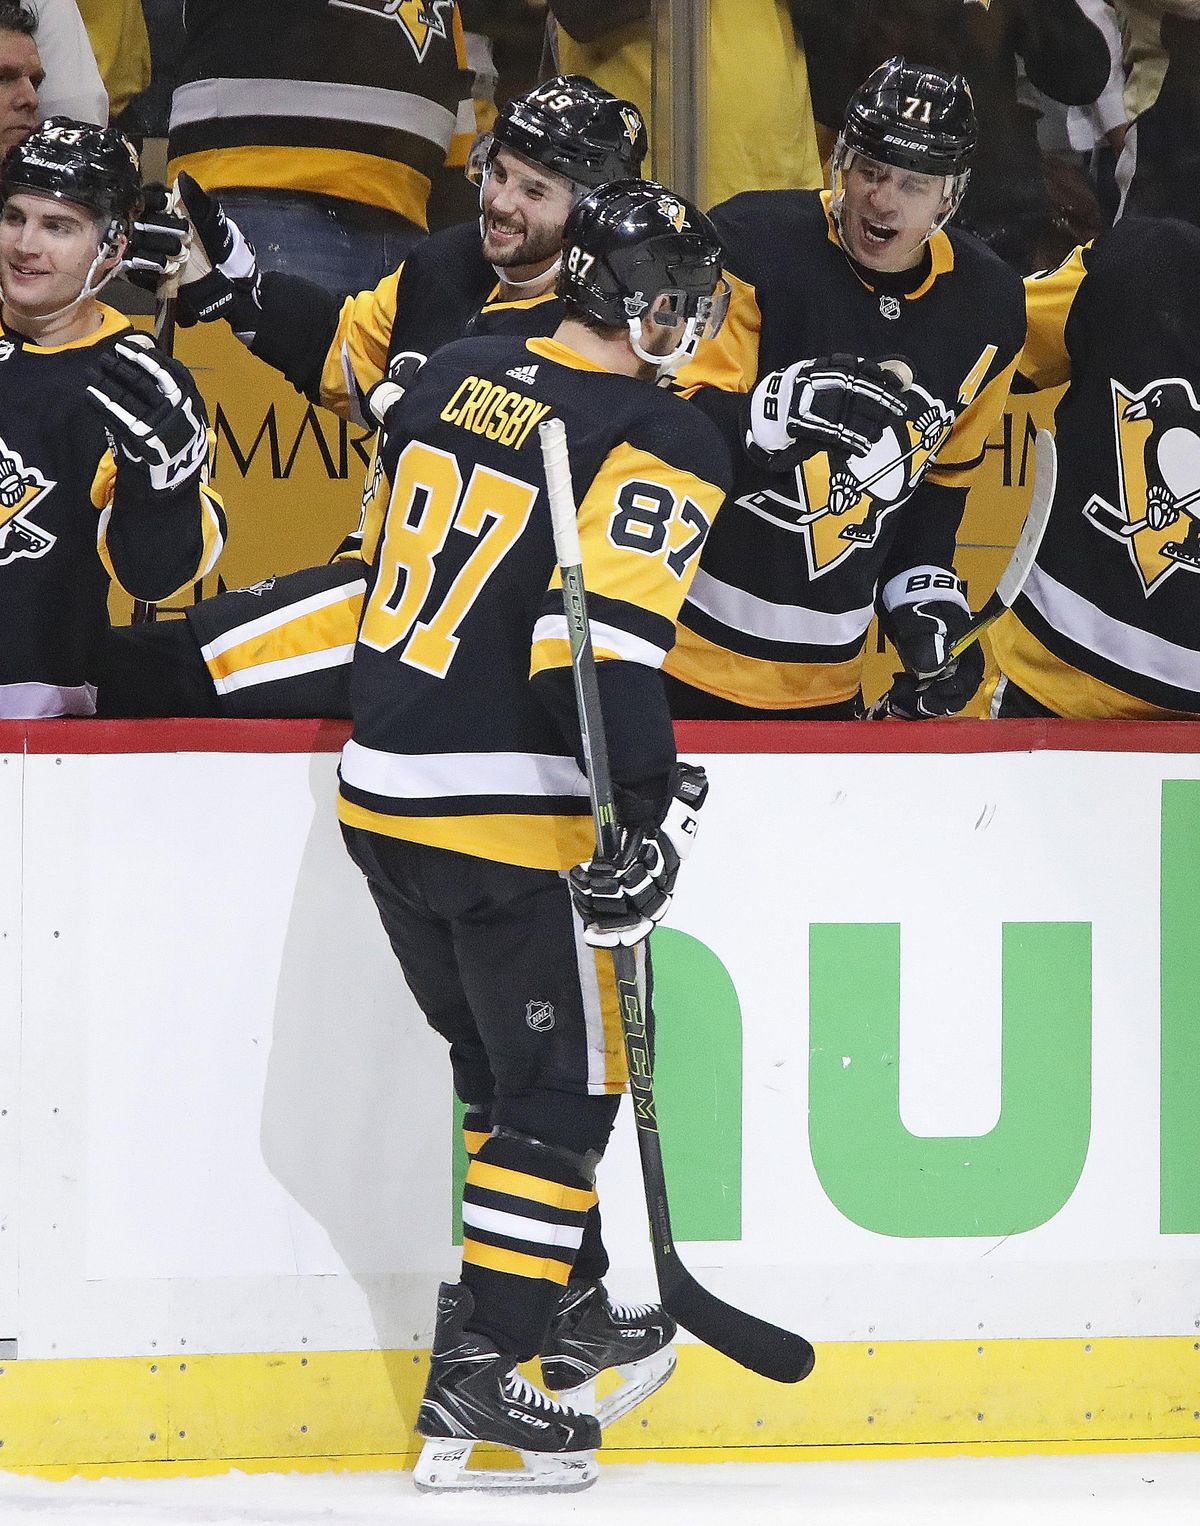 Pittsburgh Penguins’ Sidney Crosby (87) celebrates his goal as he returns to the bench during the second period in Game 1 of an NHL first-round hockey playoff series against the Philadelphia Flyers in Pittsburgh, Wednesday, April 11, 2018. (Gene J. Puskar / Associated Press)